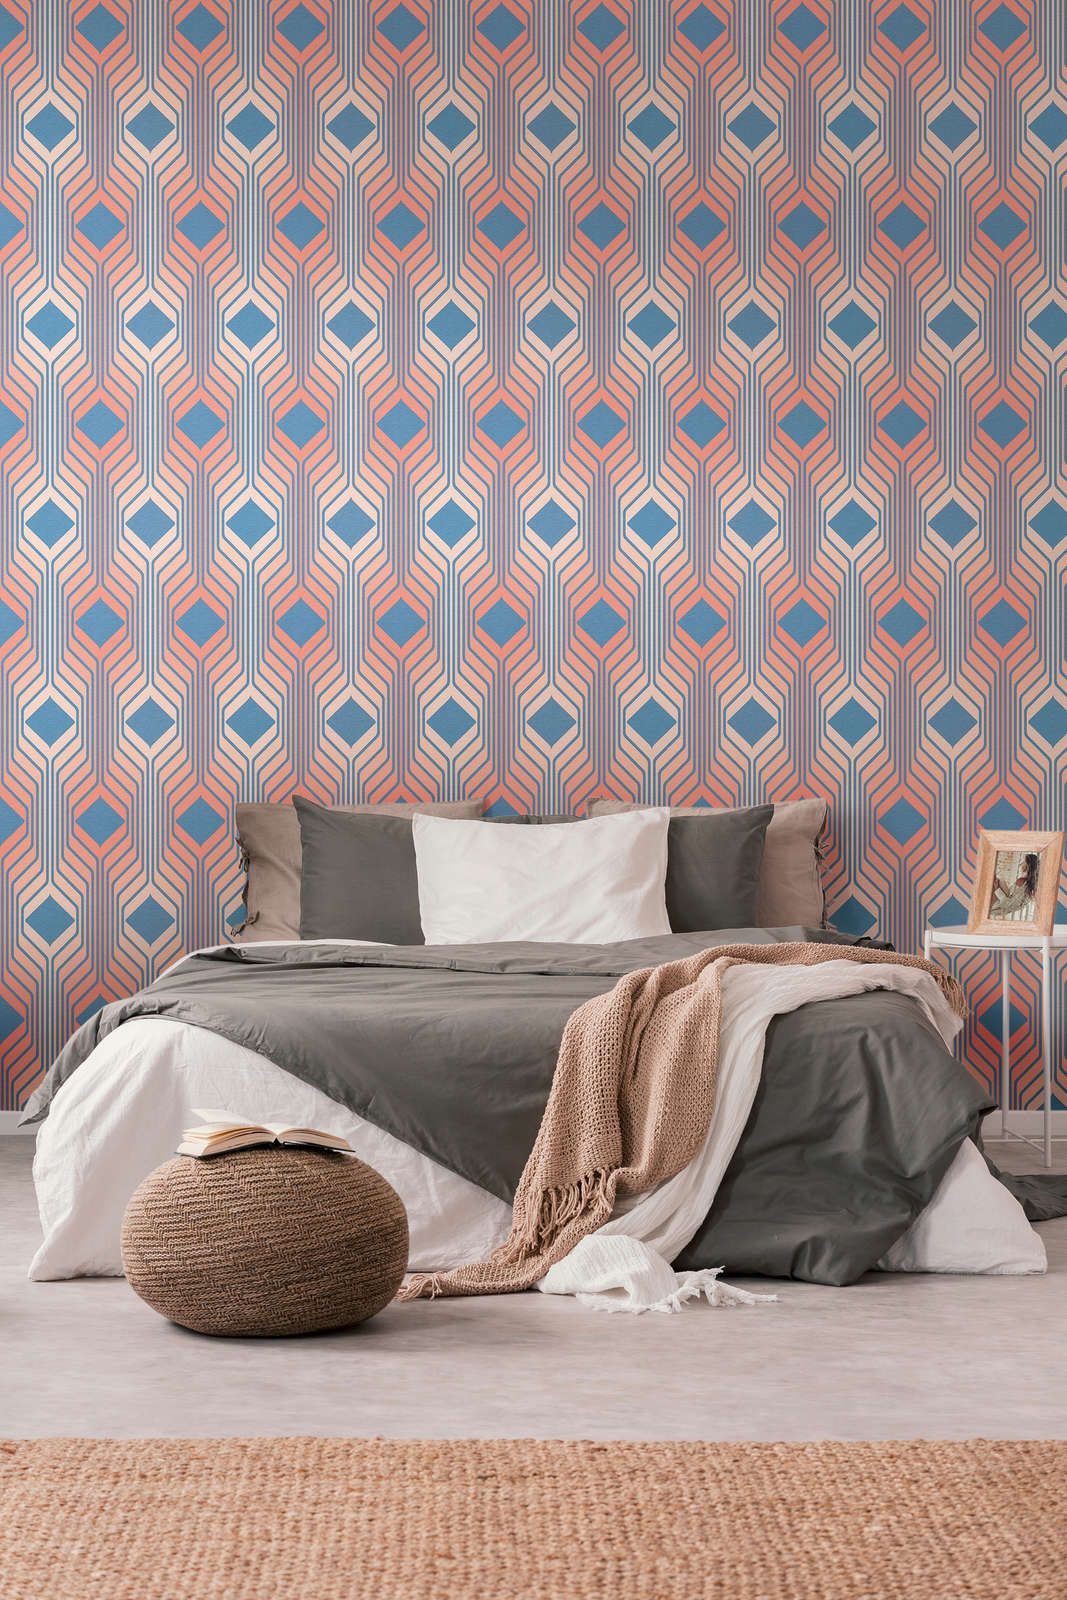             Abstract Retro Style Diamond Pattern - Blue, Red, Pink
        